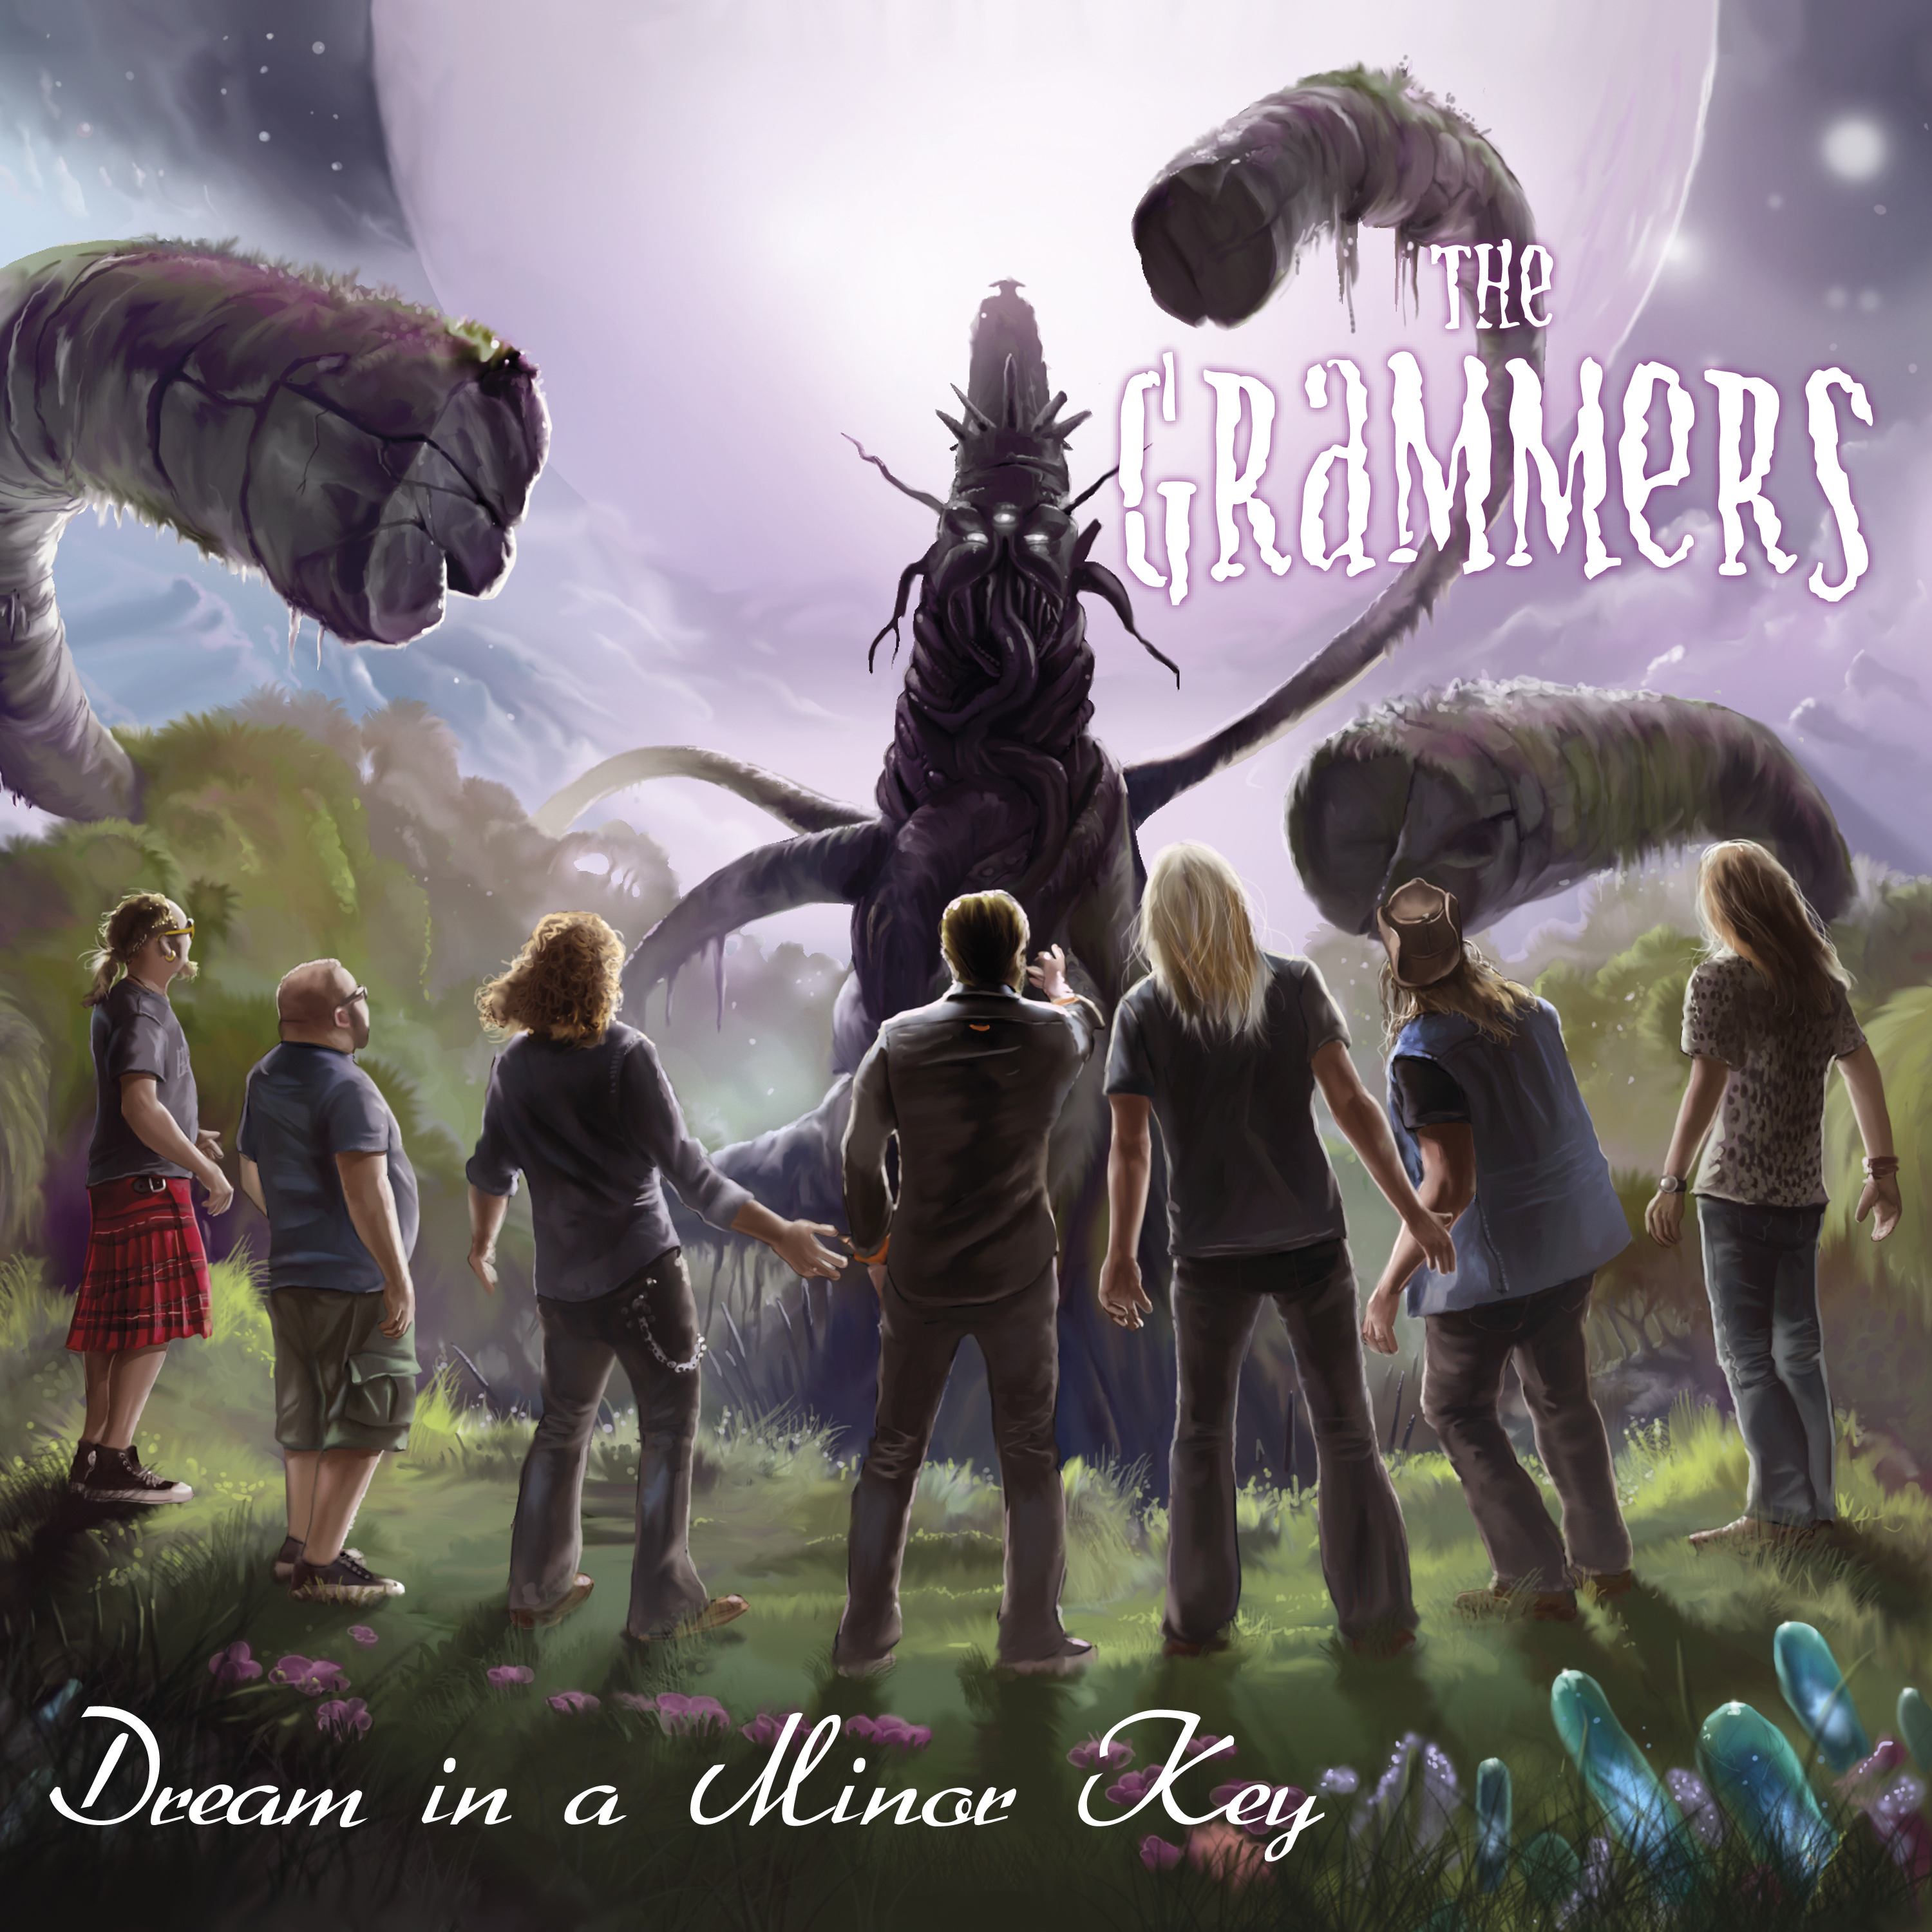 The Grammers - Dream in a Minor Key - CD